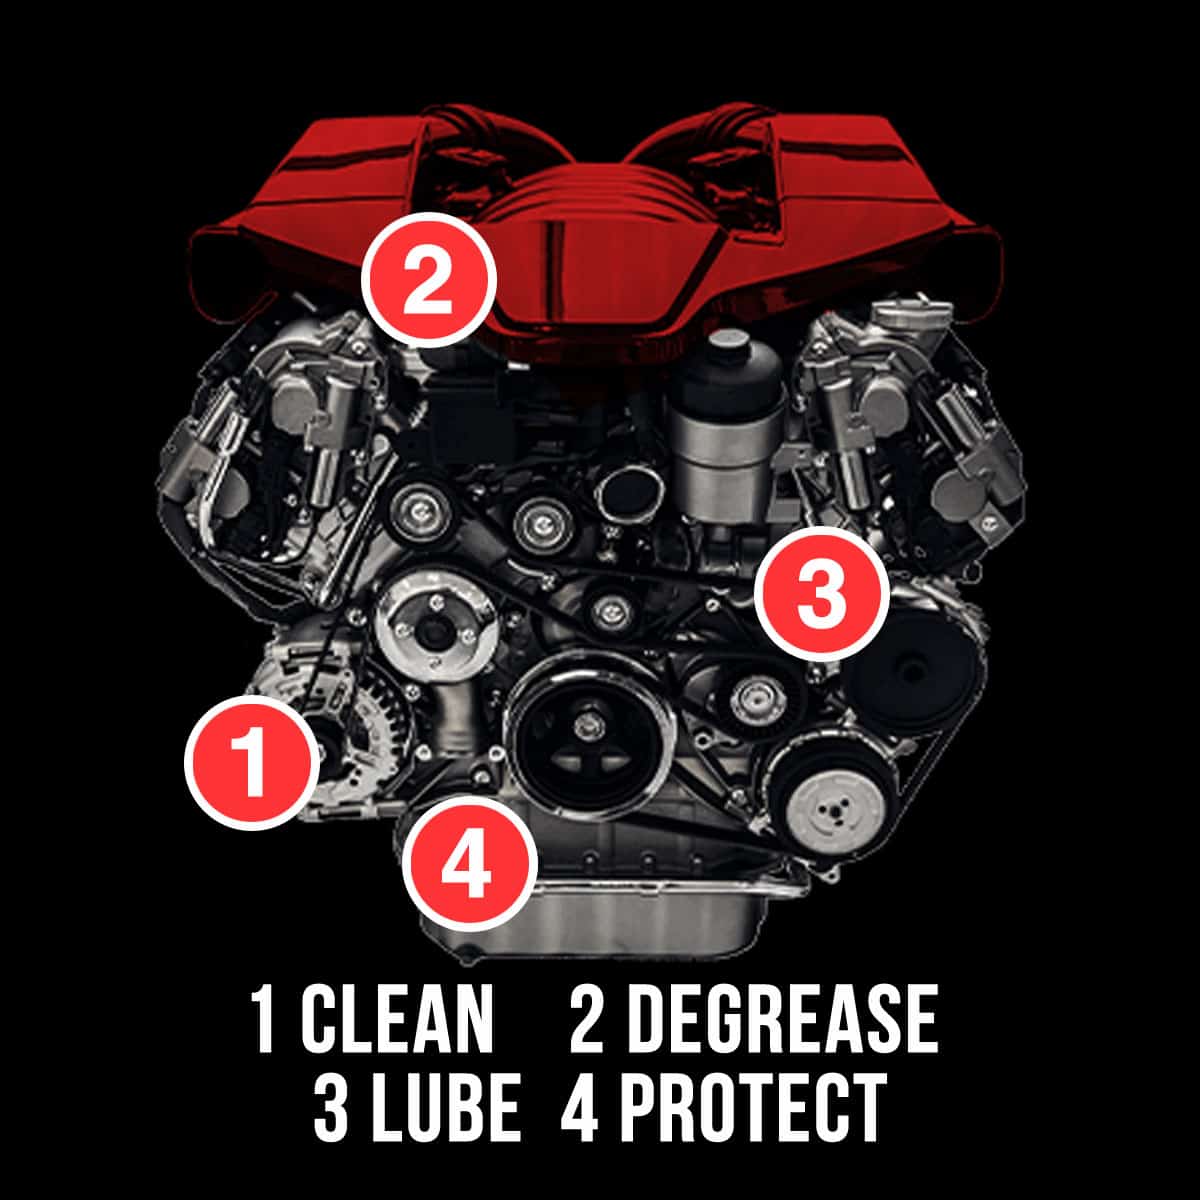 GT-85 Spray Lube with PTFE: Your general lubricant that degreases, cleans & lubes - Engine water-displacer & degreaser